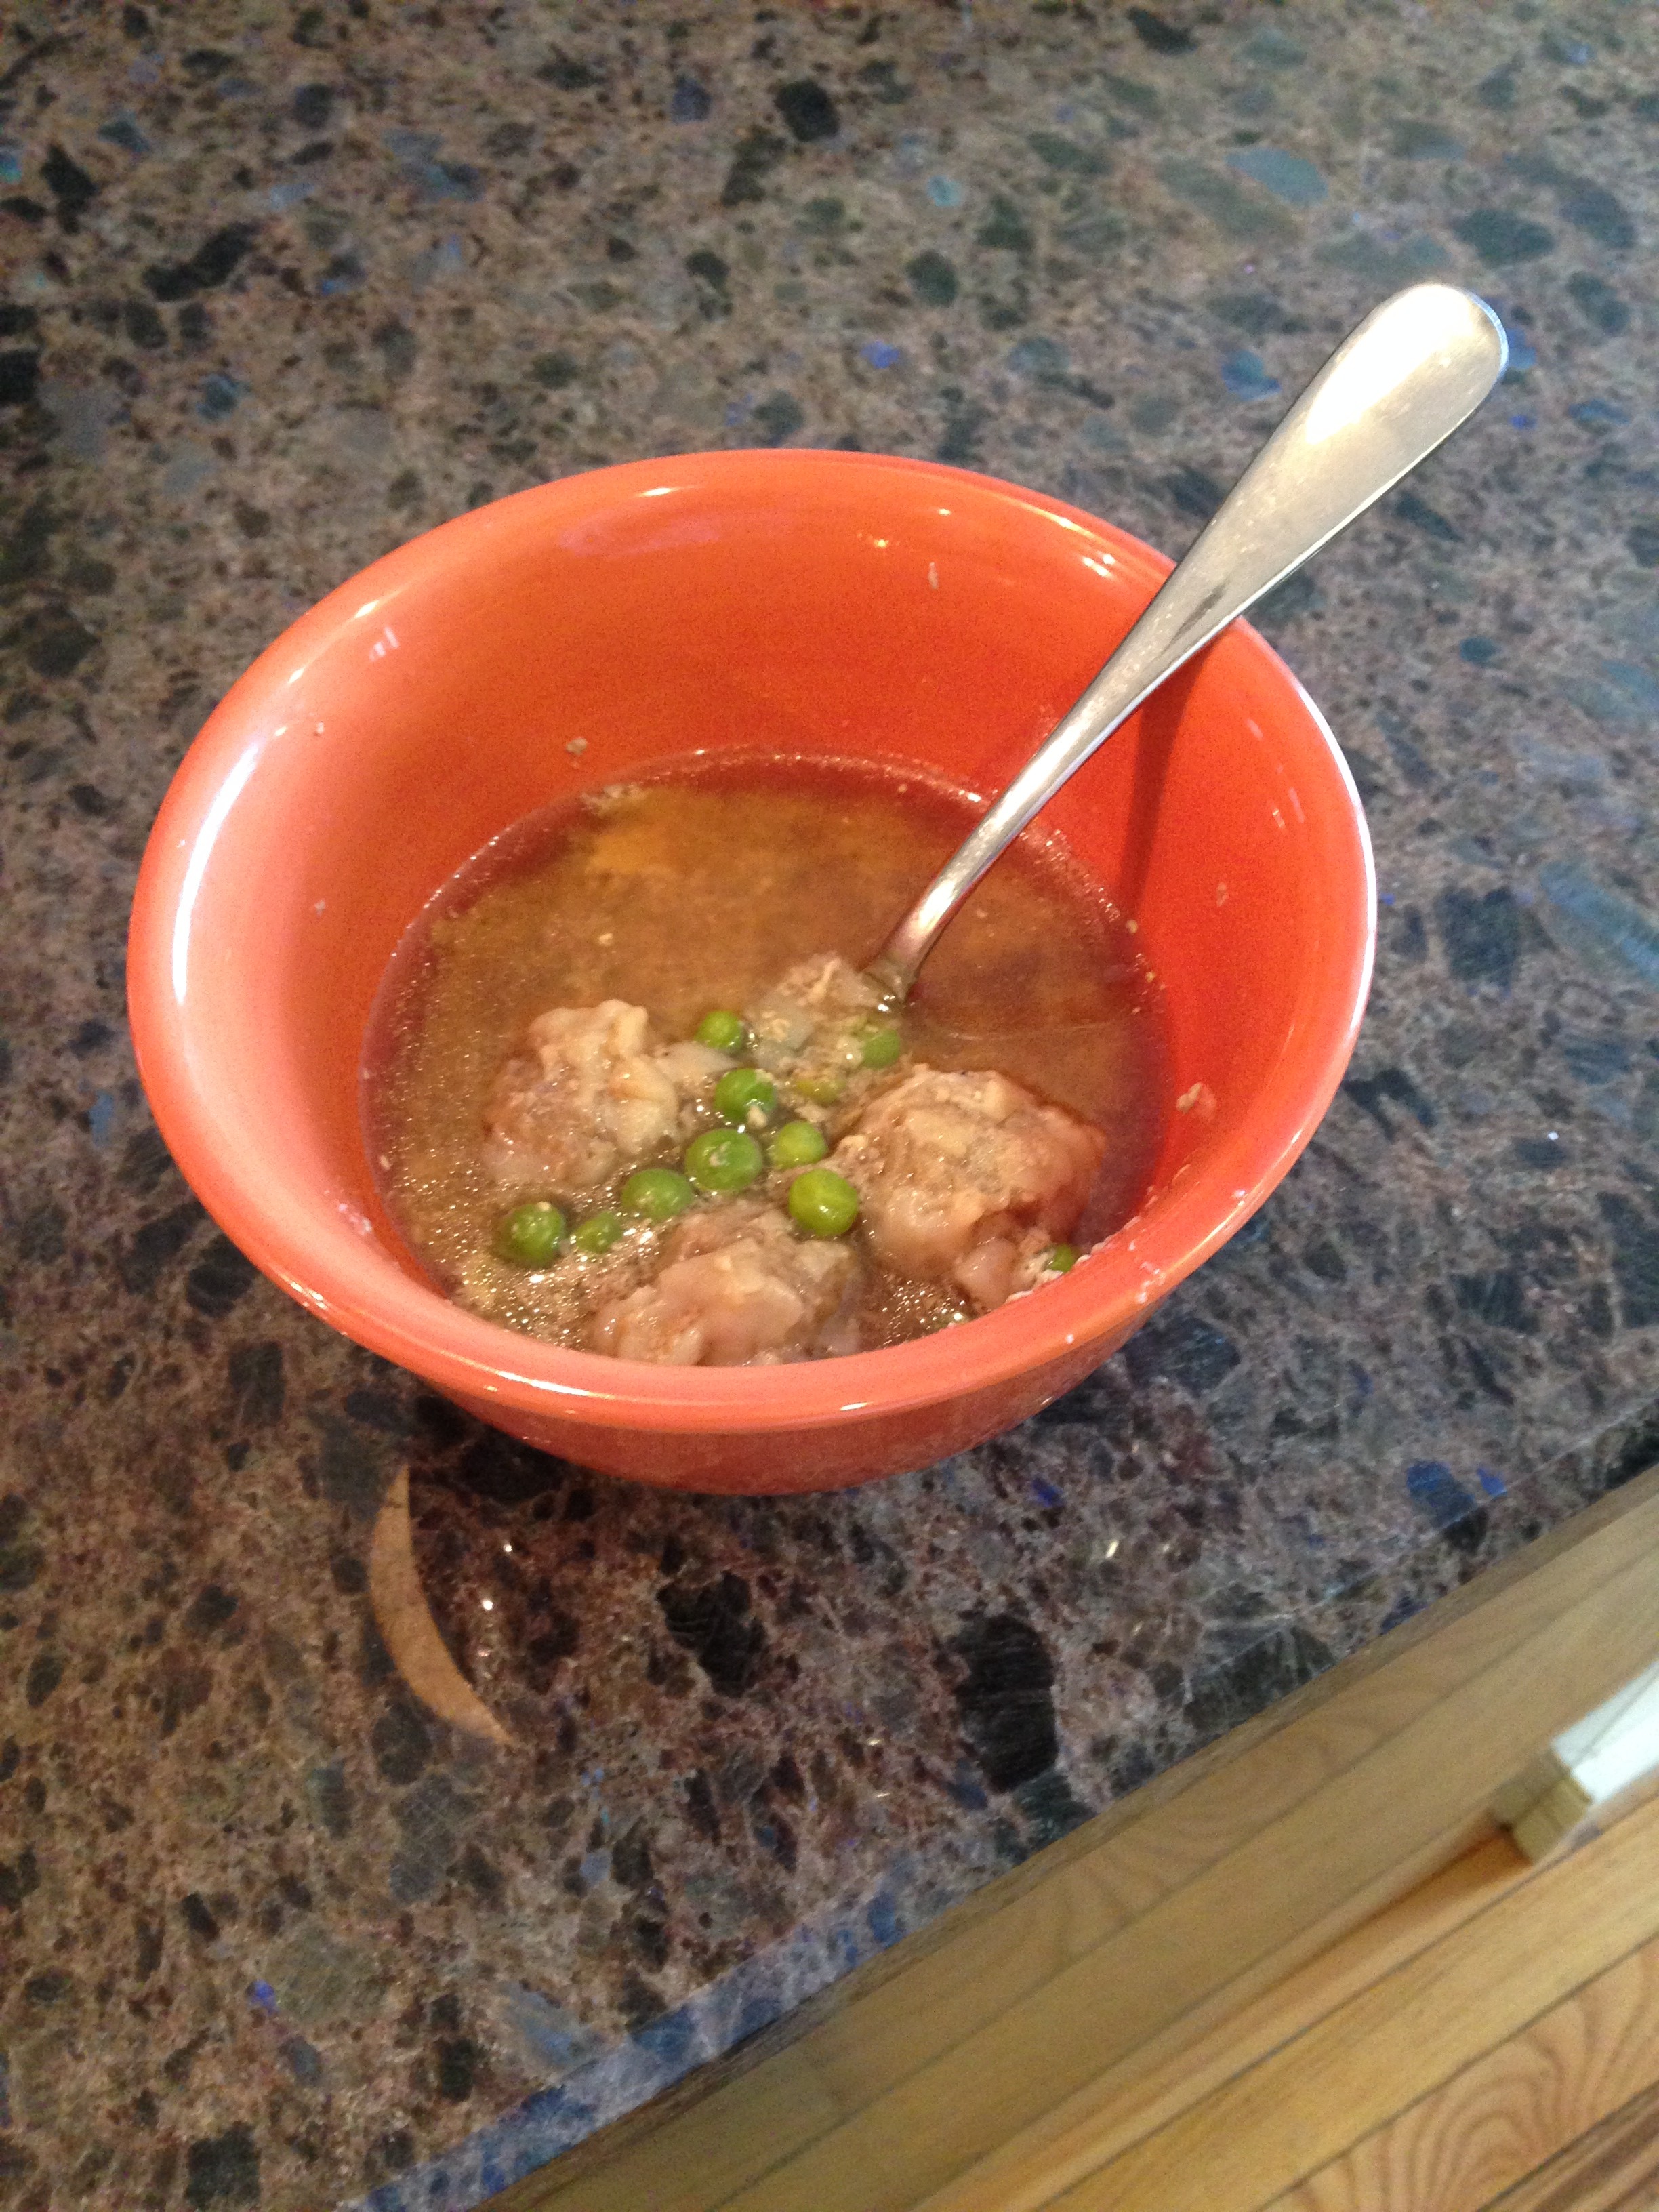 Dining with D’Amico: Beef Dumpling Egg Drop Soup